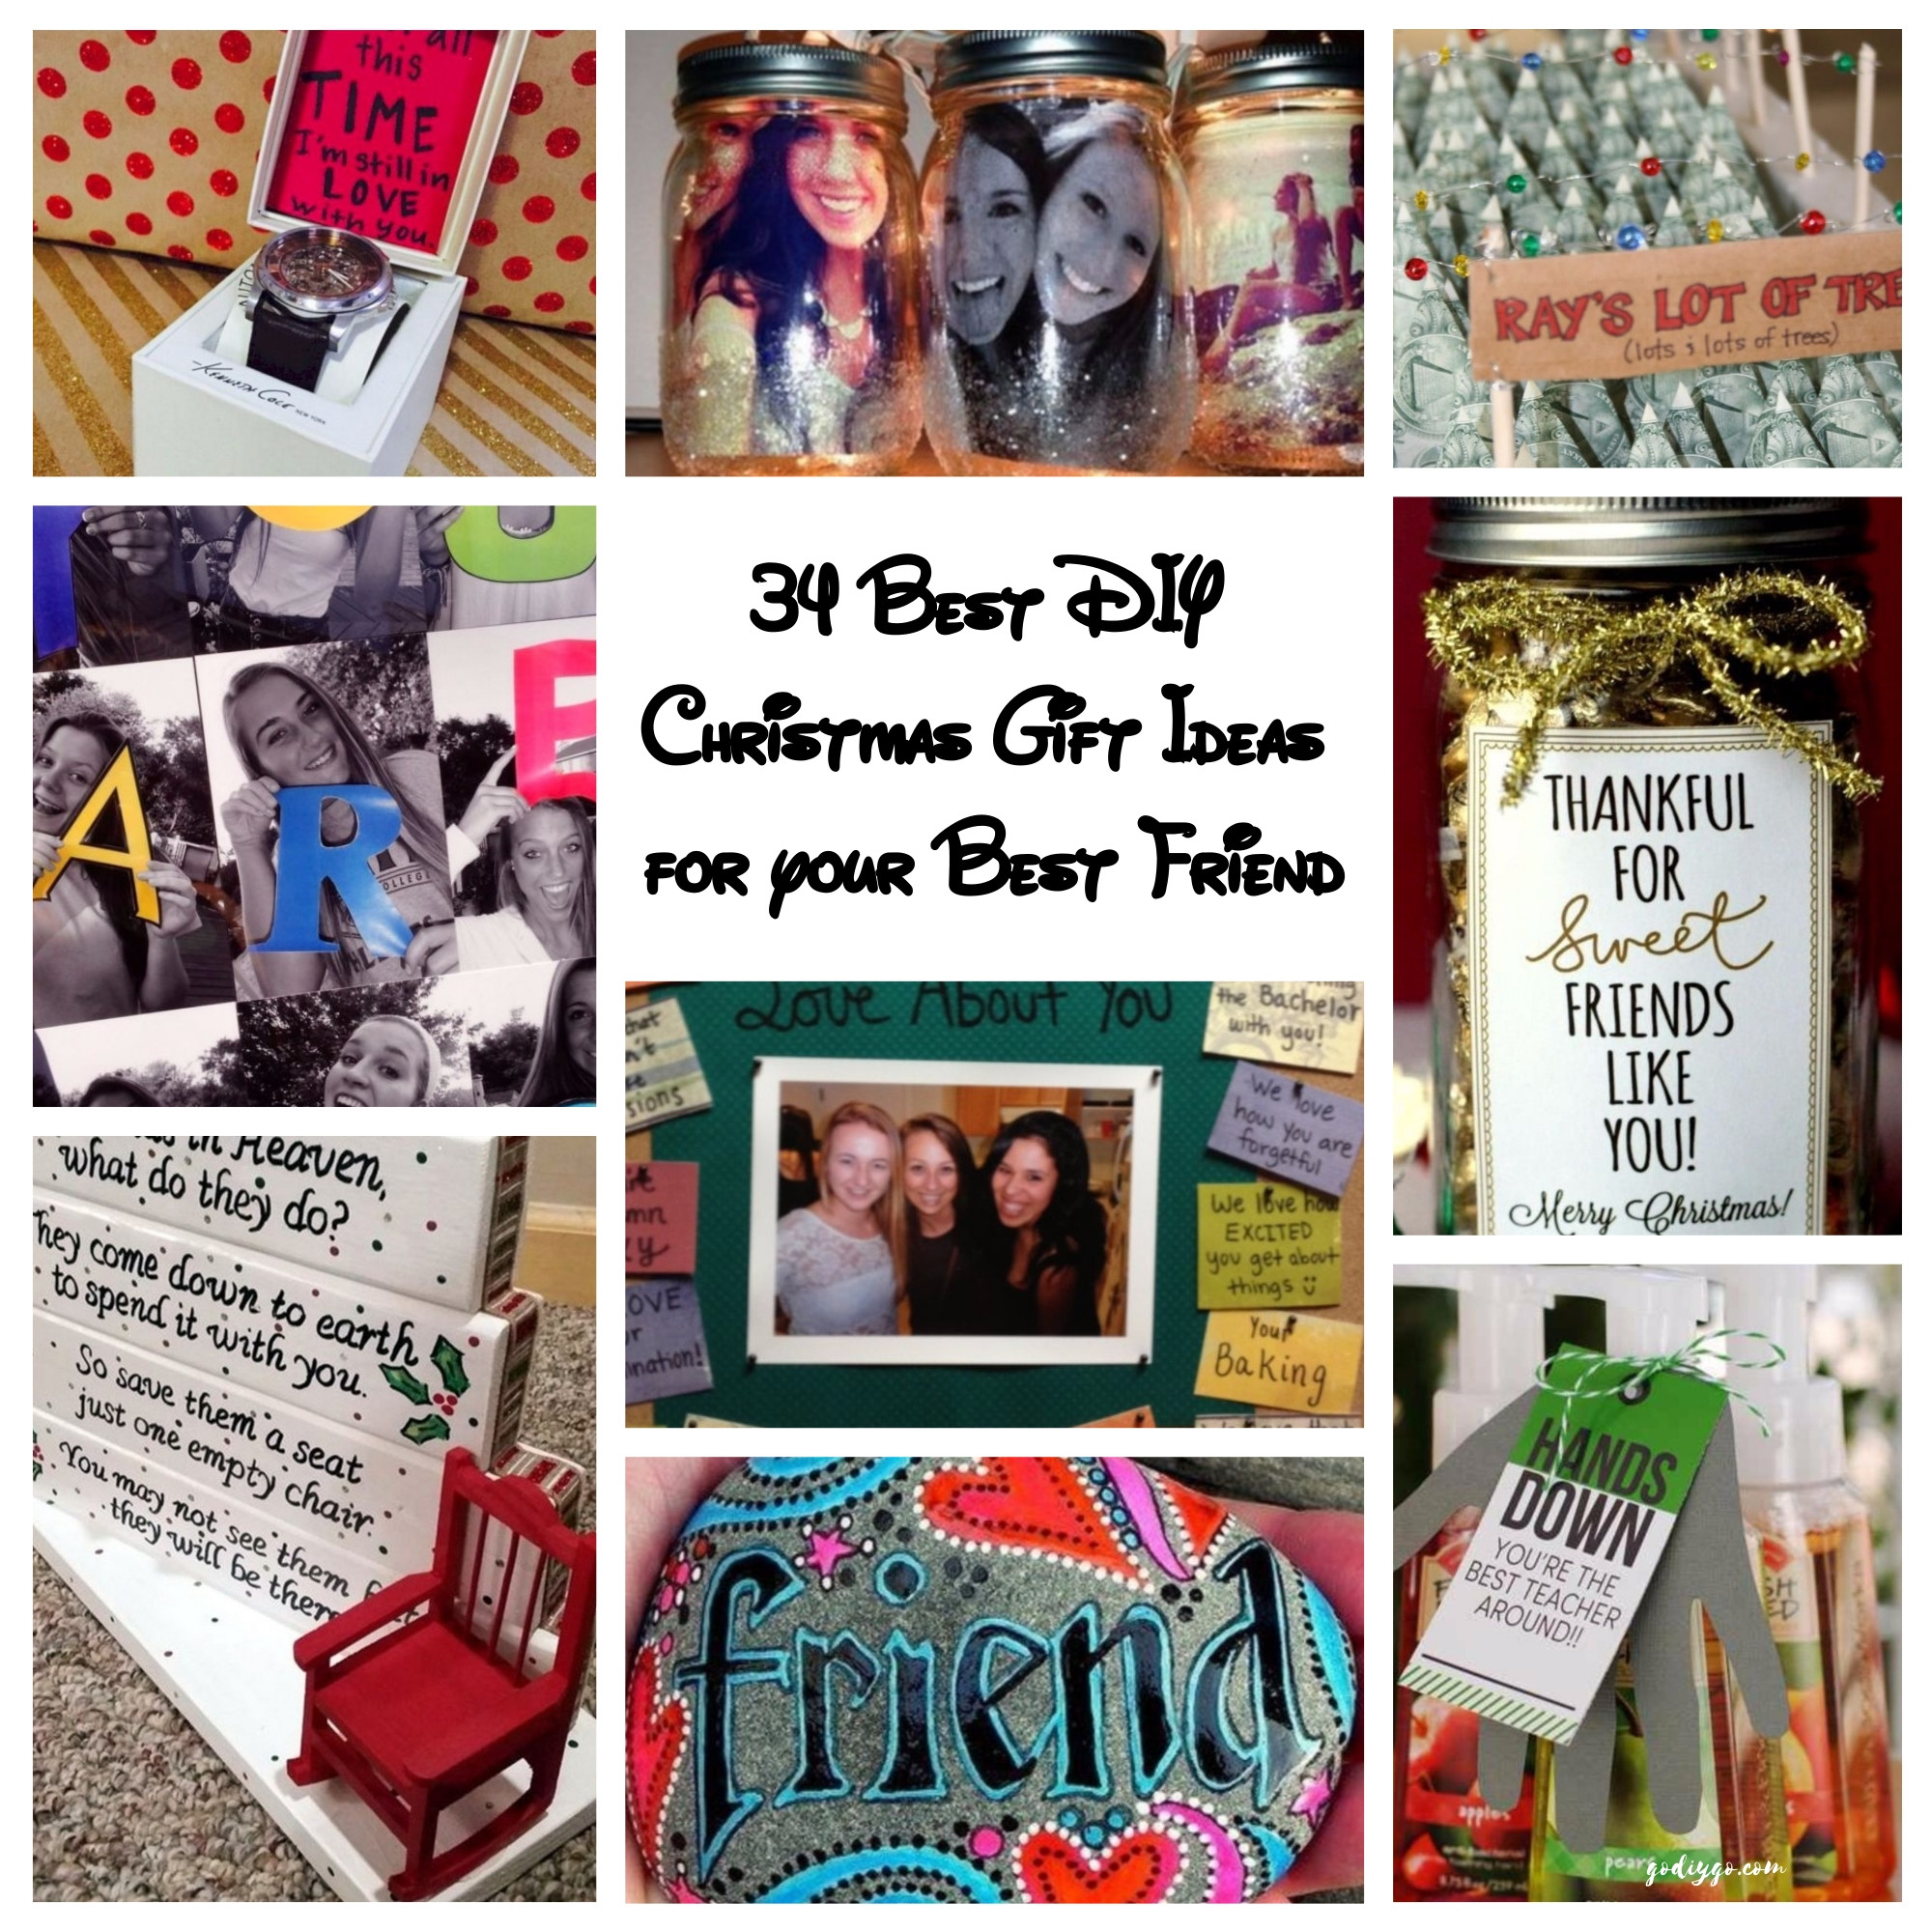 Holiday Gift Ideas For Best Friends
 34 Best DIY Christmas Gift Ideas for your Best Friend